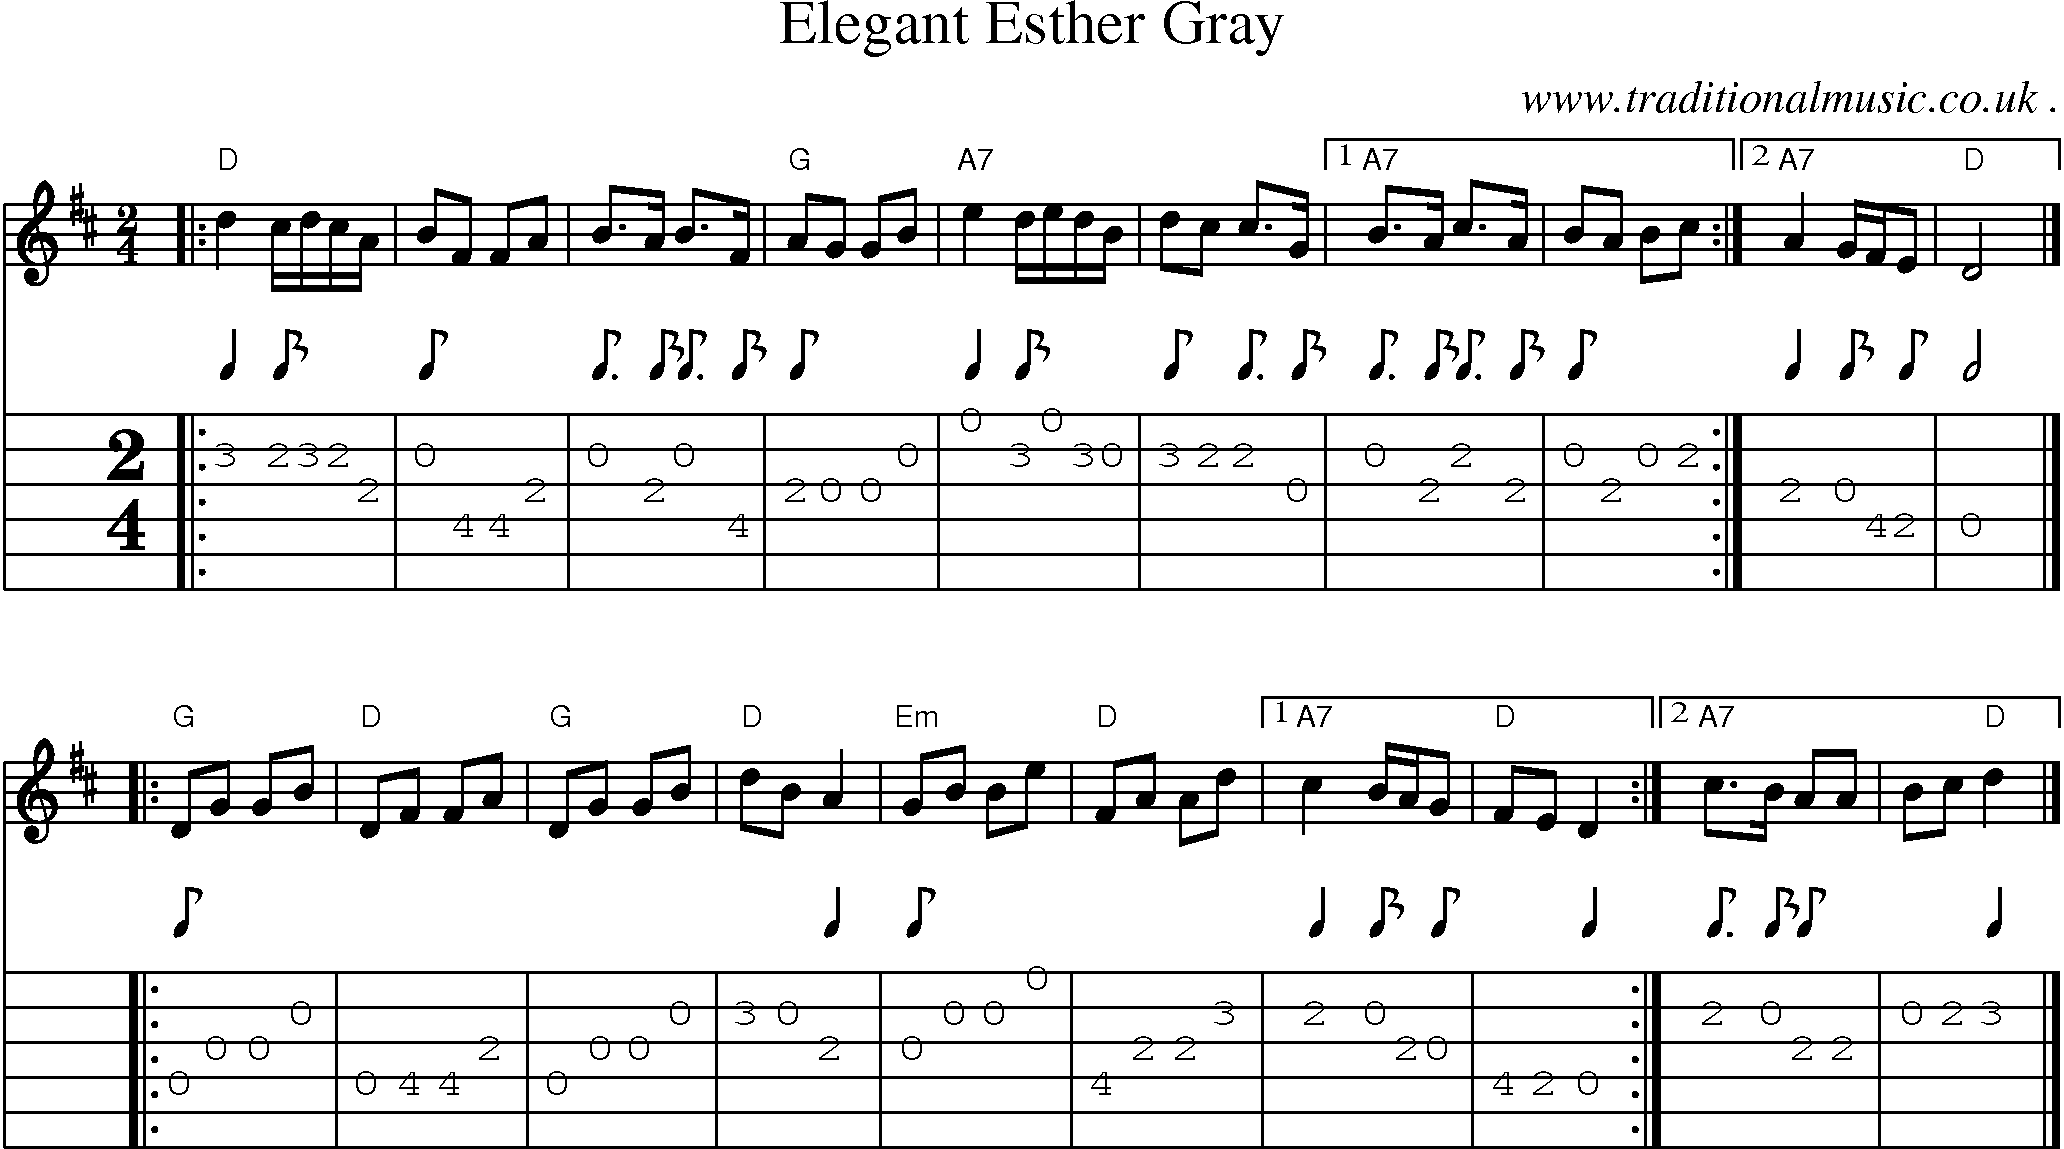 Sheet-music  score, Chords and Guitar Tabs for Elegant Esther Gray